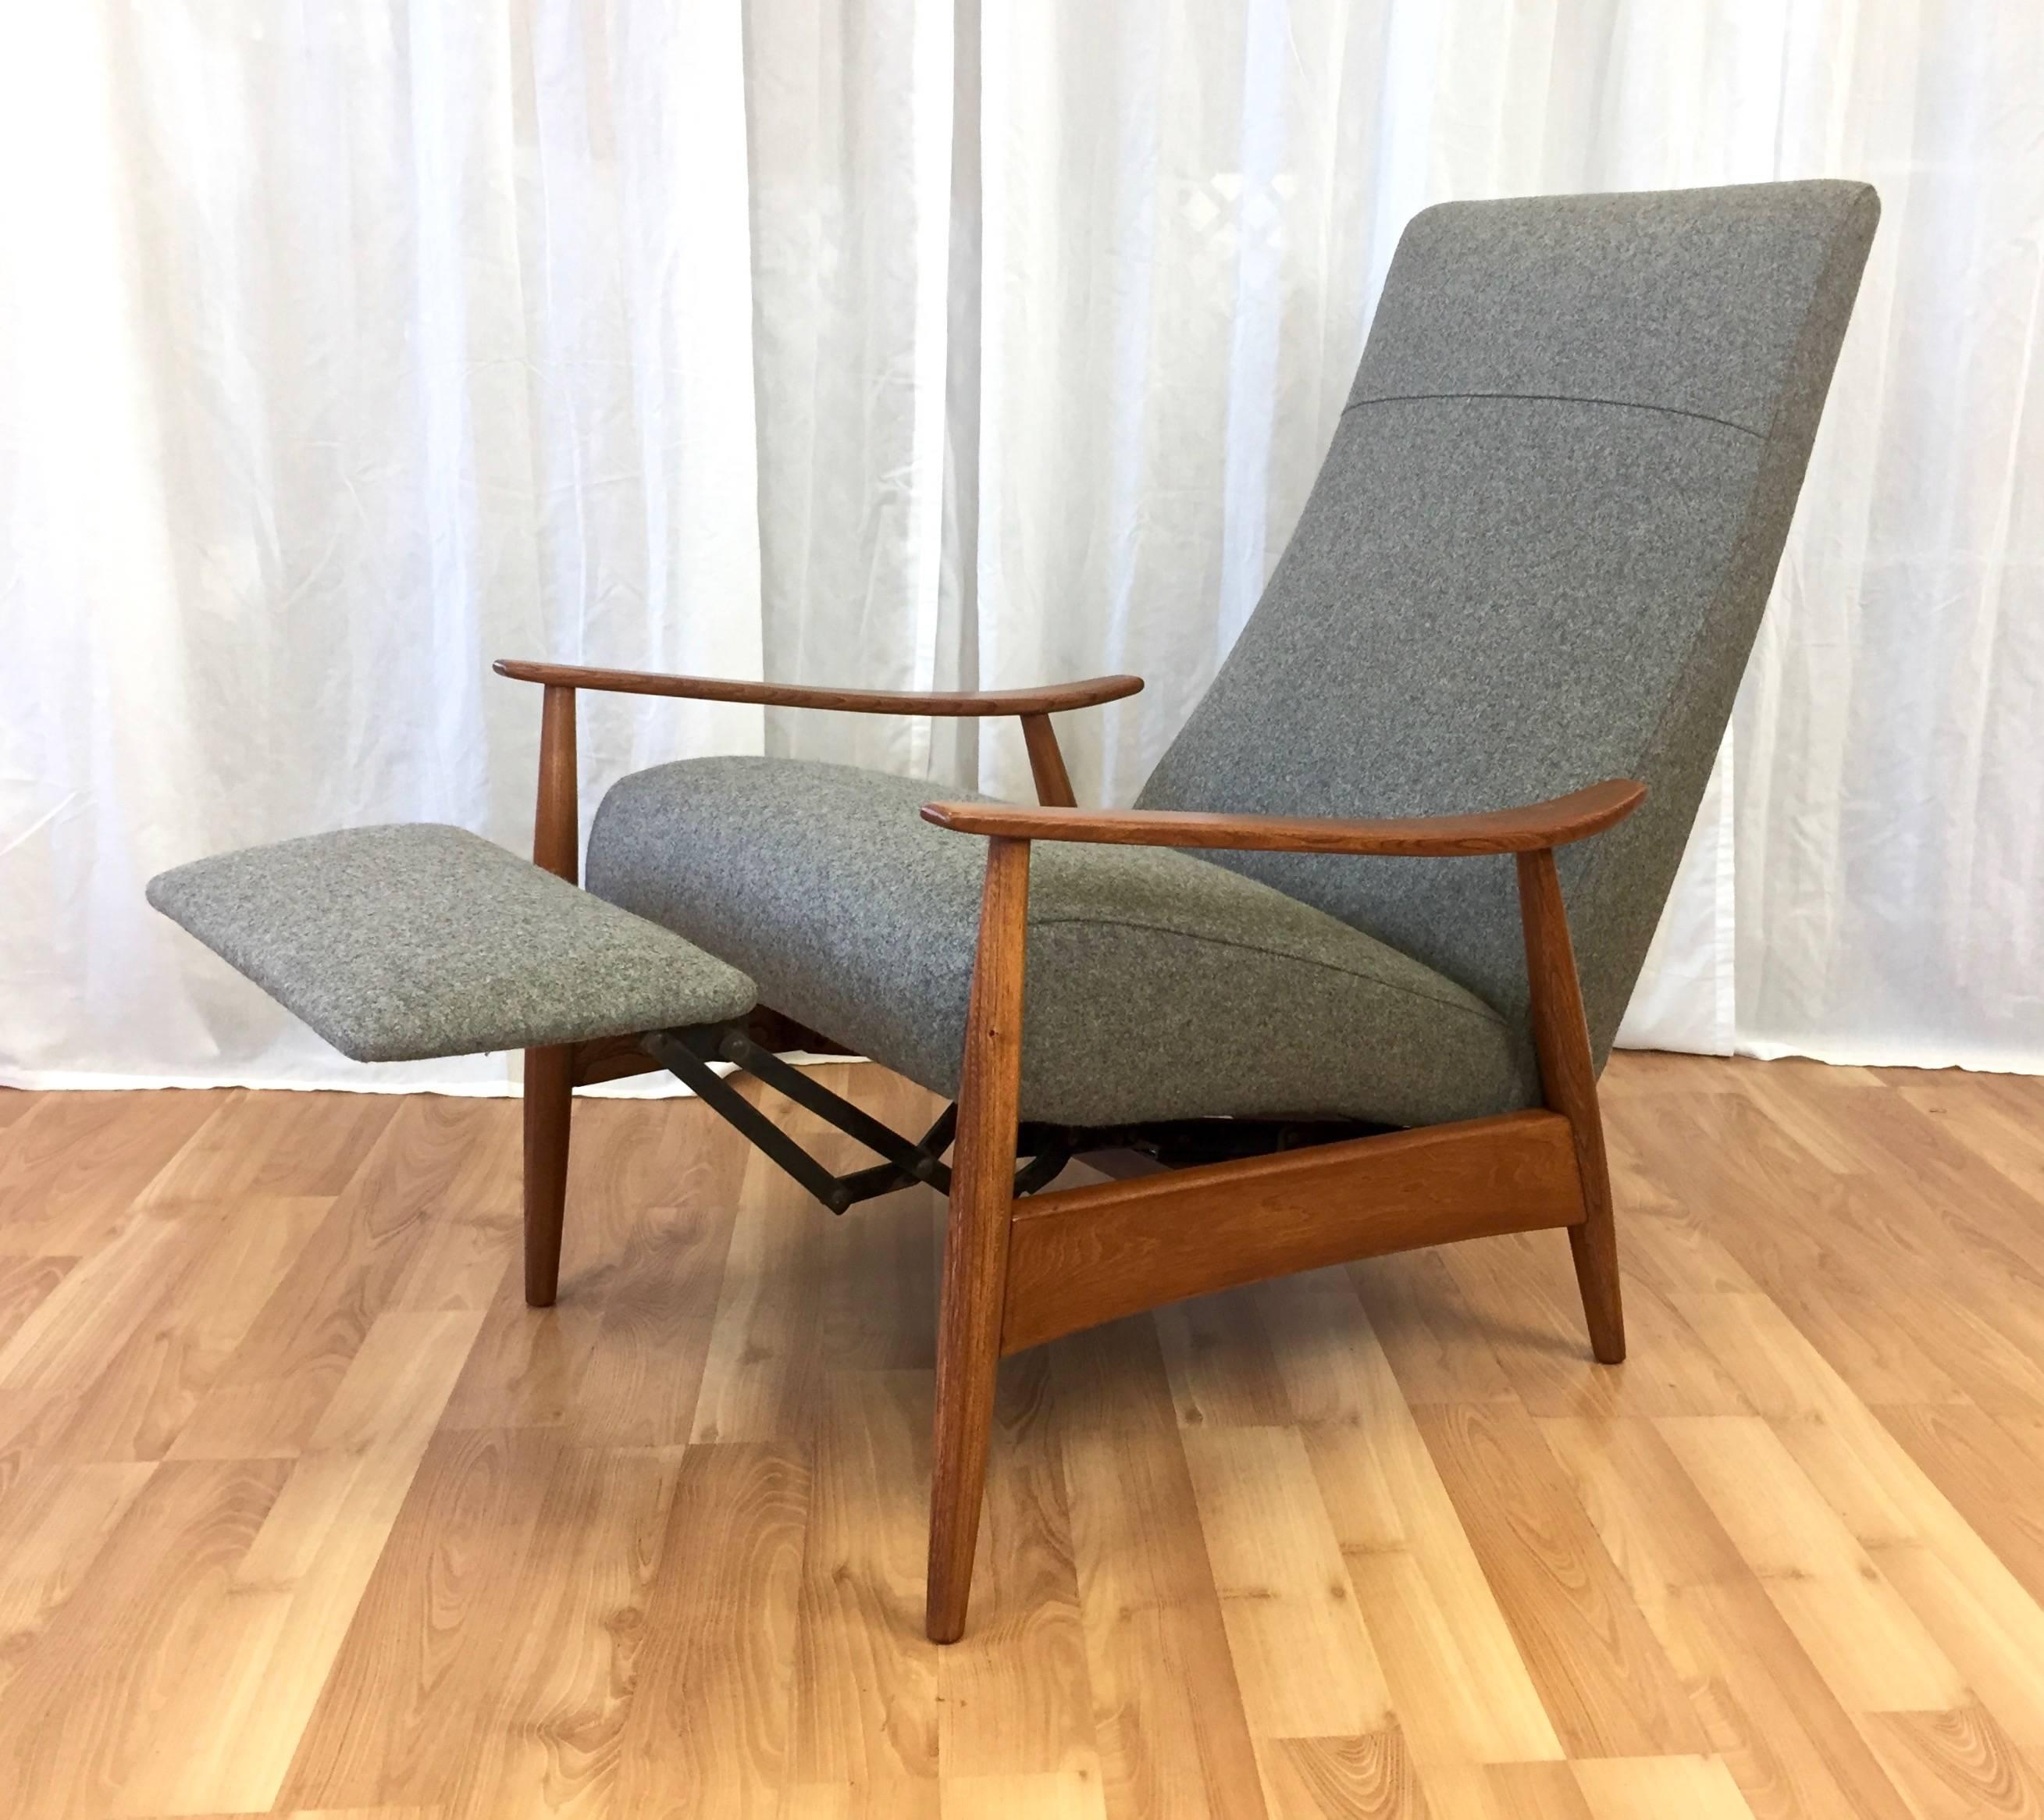 A vintage walnut “Recliner 74” with flip-out footrest and wool upholstery by Milo Baughman for Thayer Coggin.

Danish modern lines meet American Mid-Century Modern ingenuity. Professionally restored walnut frame features finely figured grain,